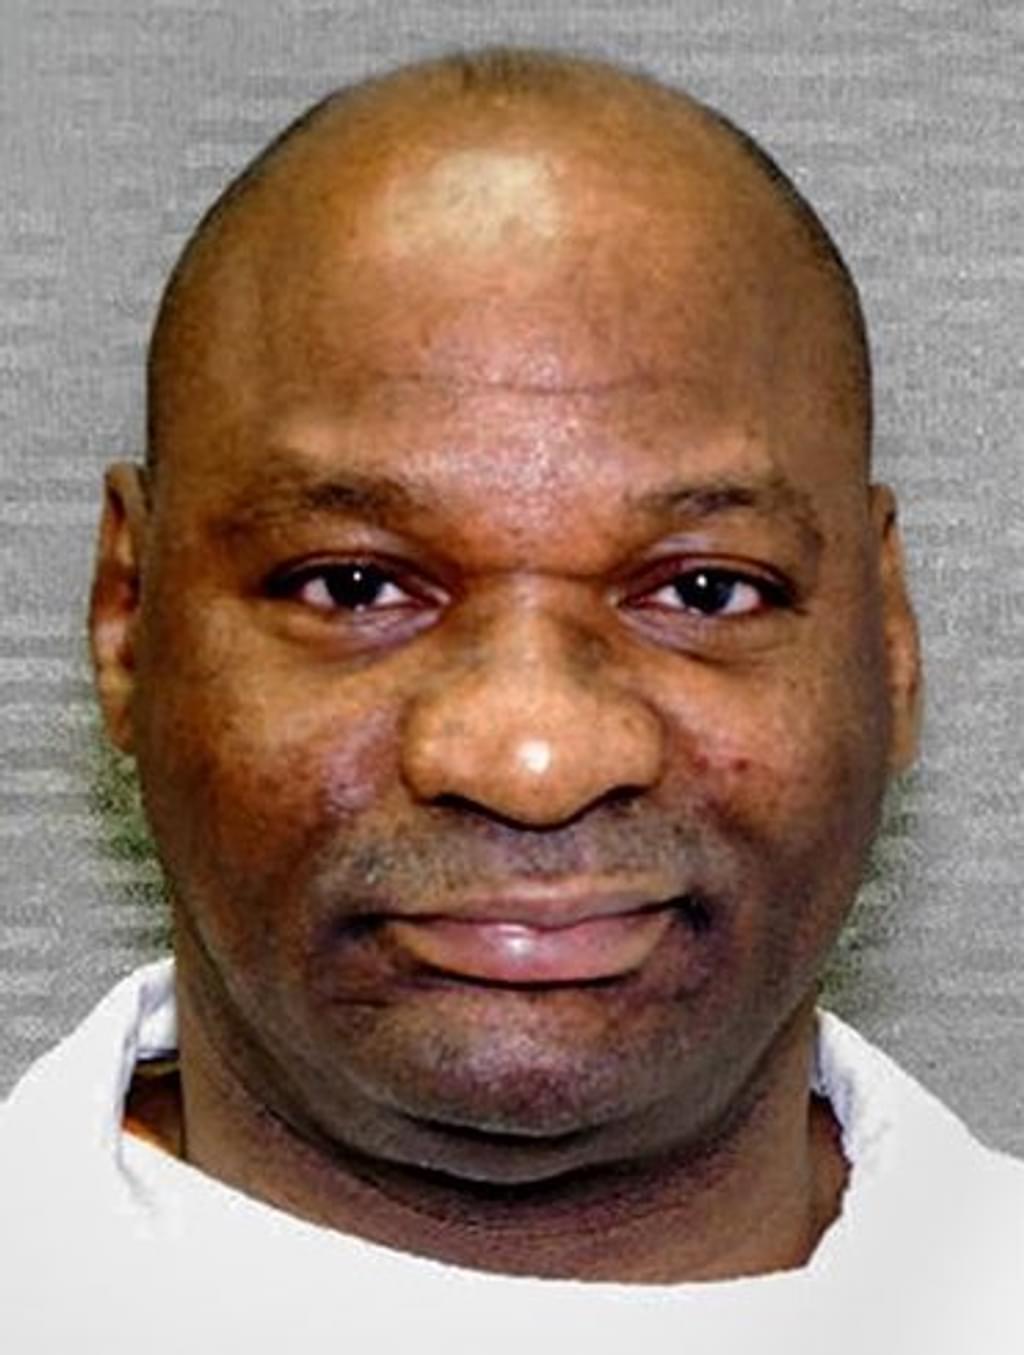 Texas Legislators Ask Why Intellectually Disabled Bobby James Moore is Still on Death Row